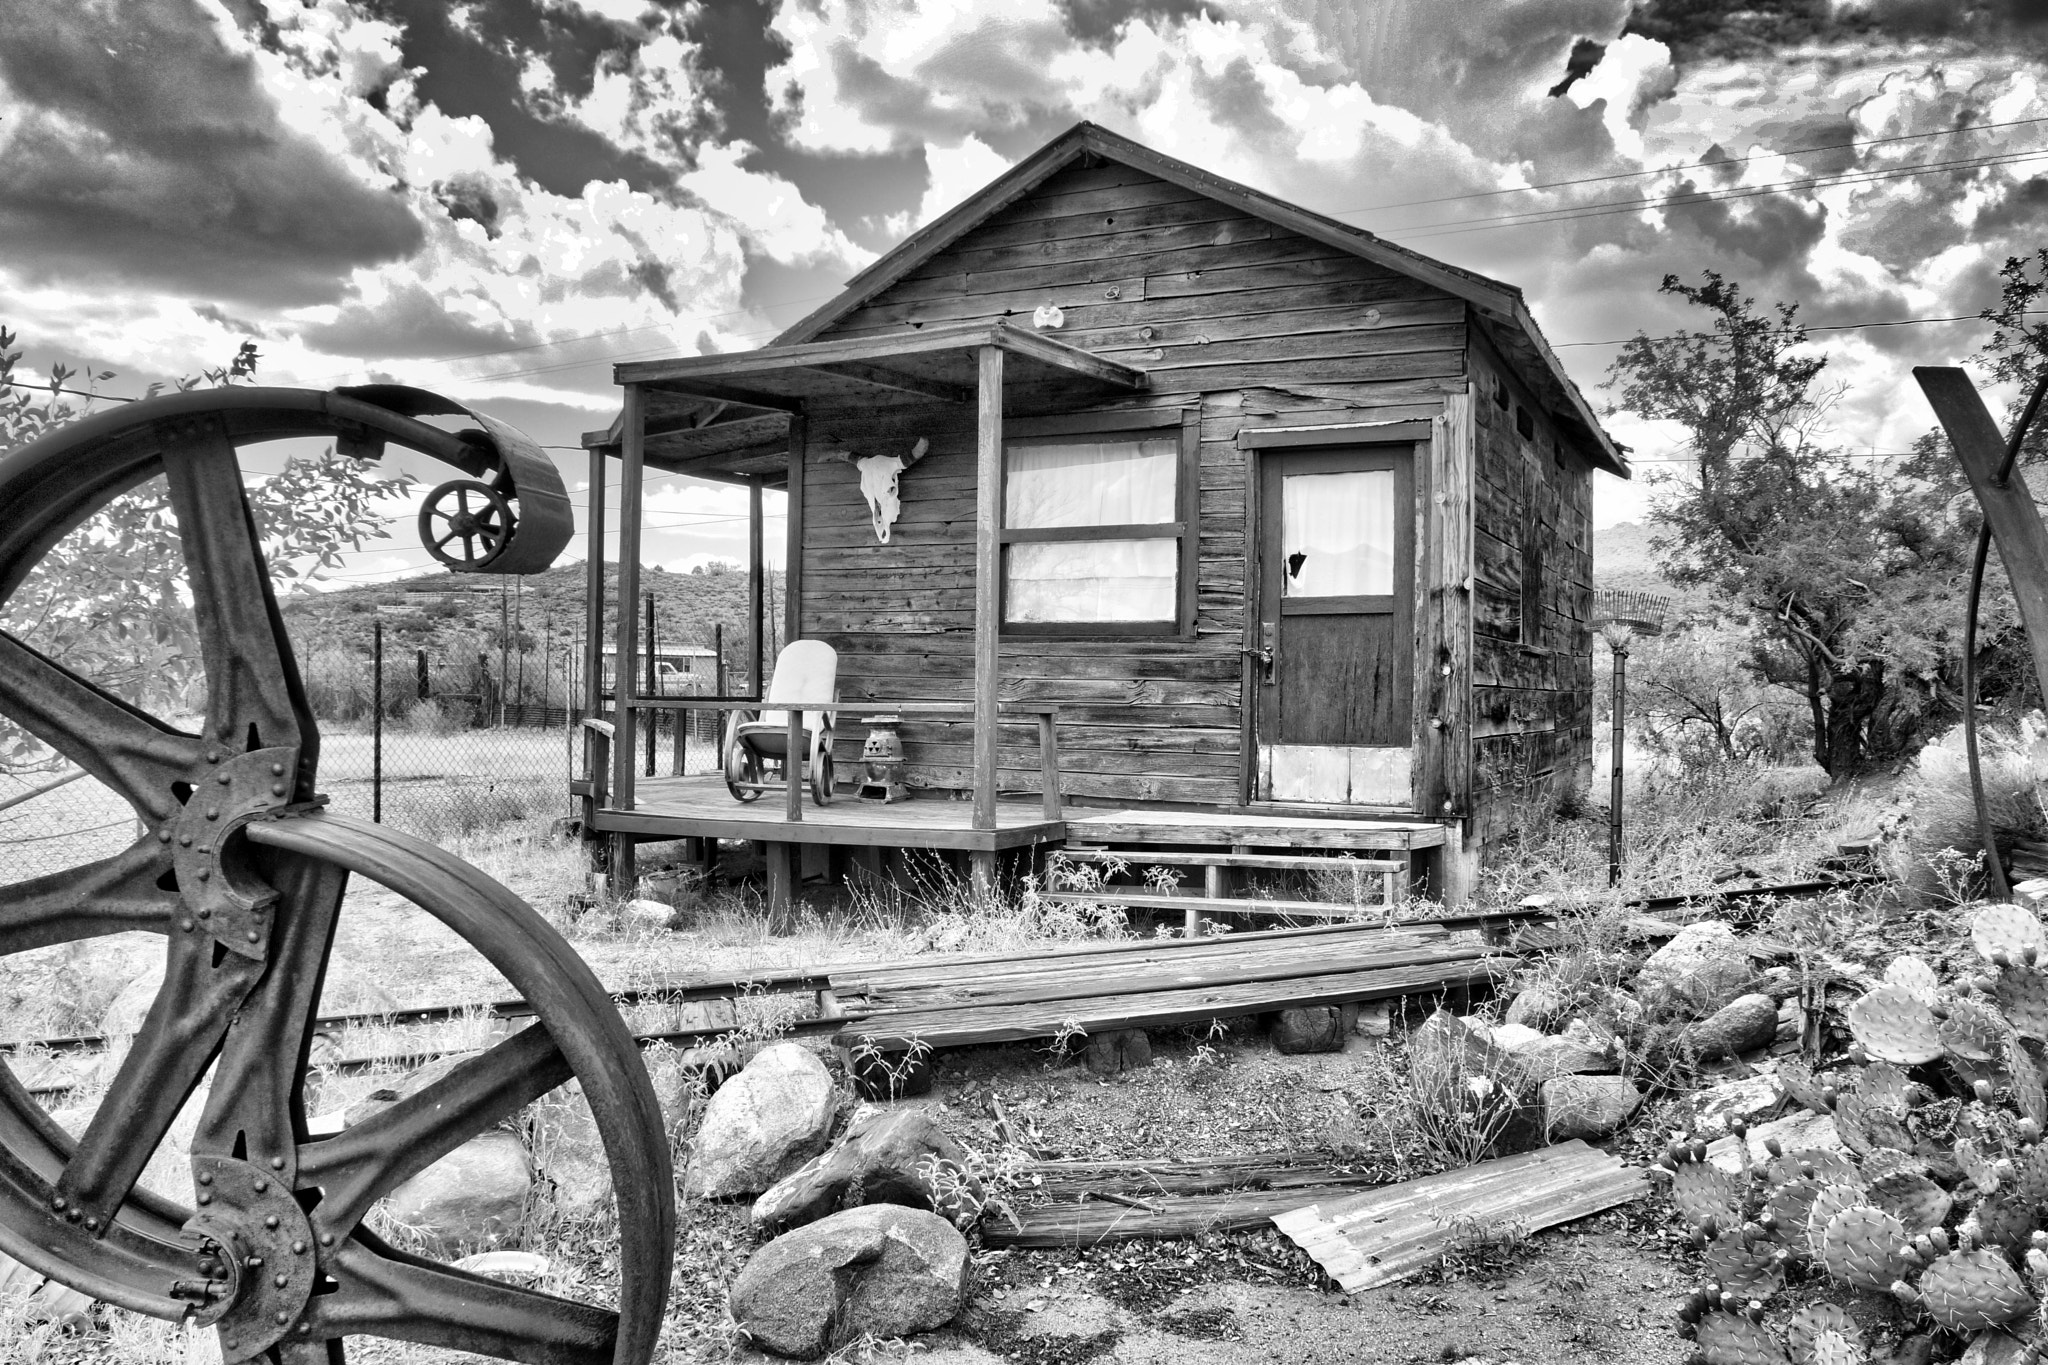 Hasselblad Lunar sample photo. Little house by the tracks photography